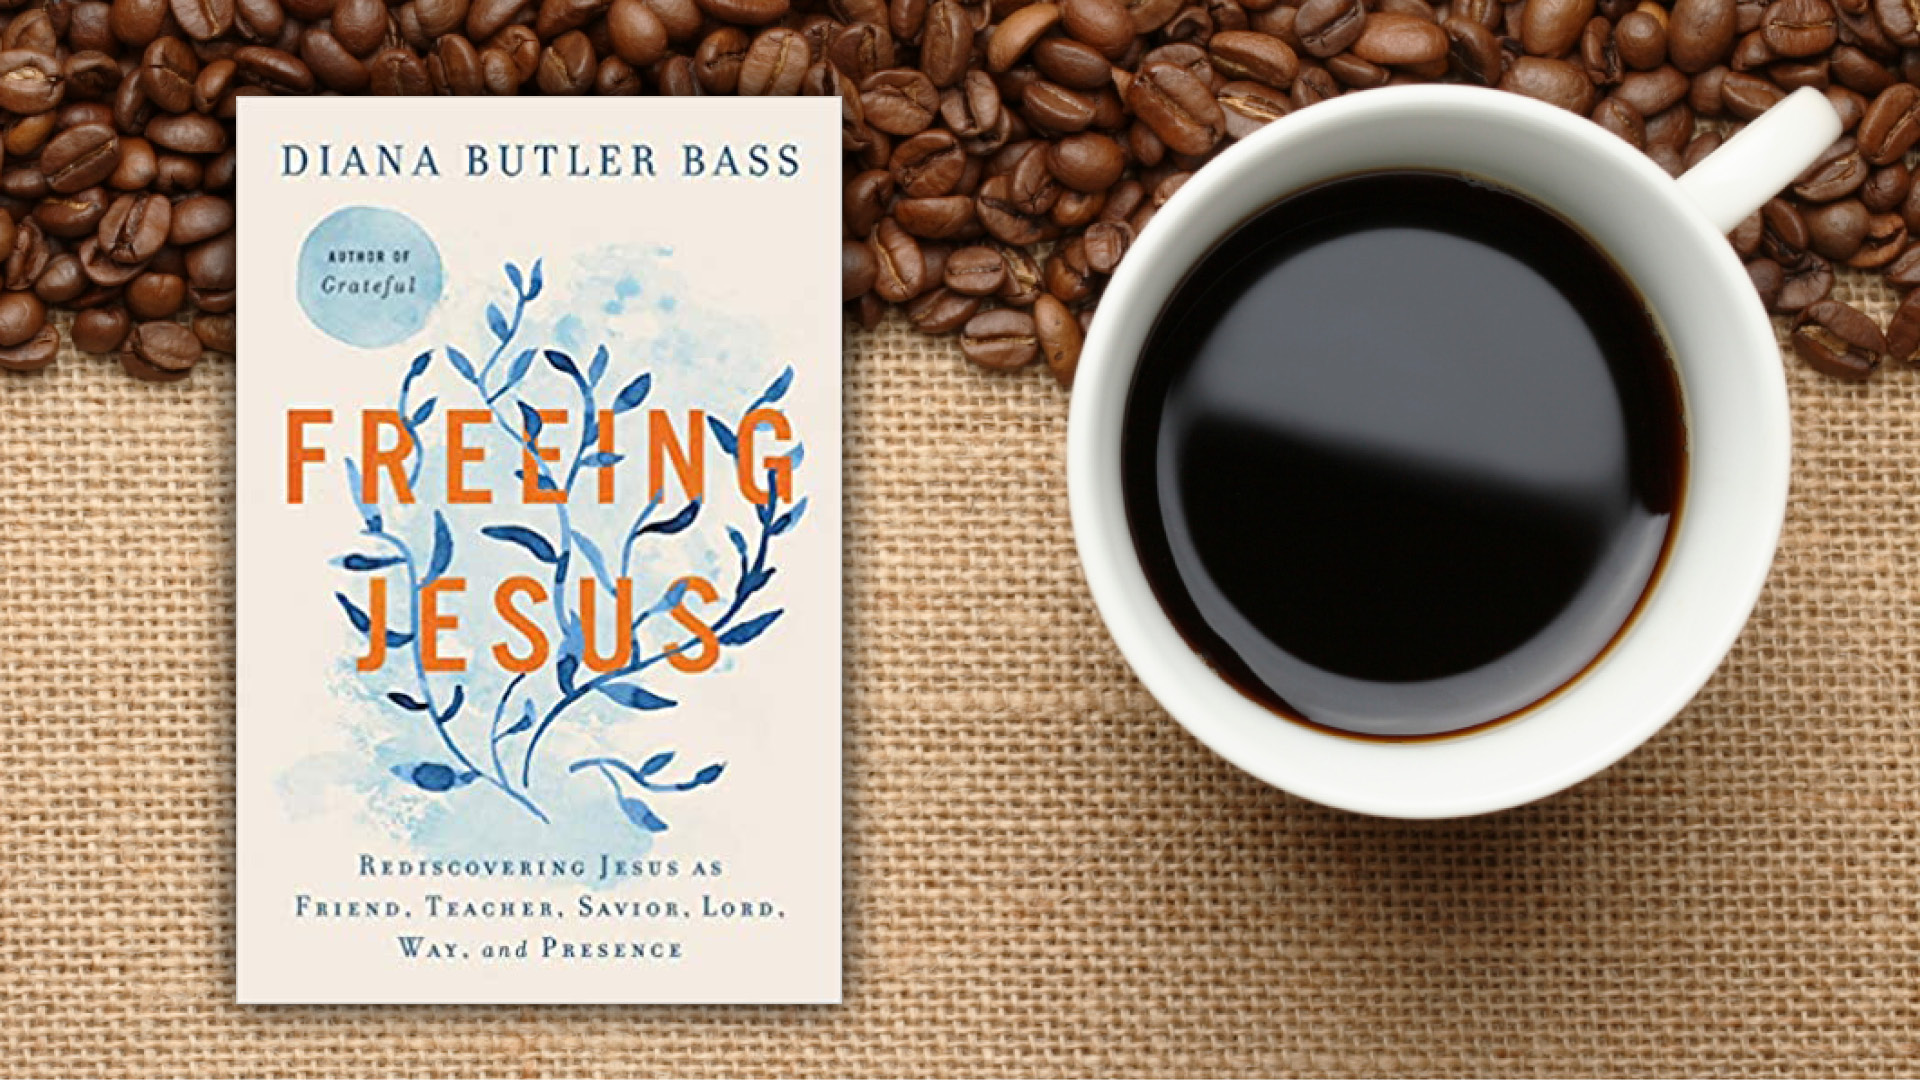 Theology, Thoughts & Coffee
Sundays, 8 a.m., Zoom
Book Study: Freeing Jesus by Diana Butler Bass
